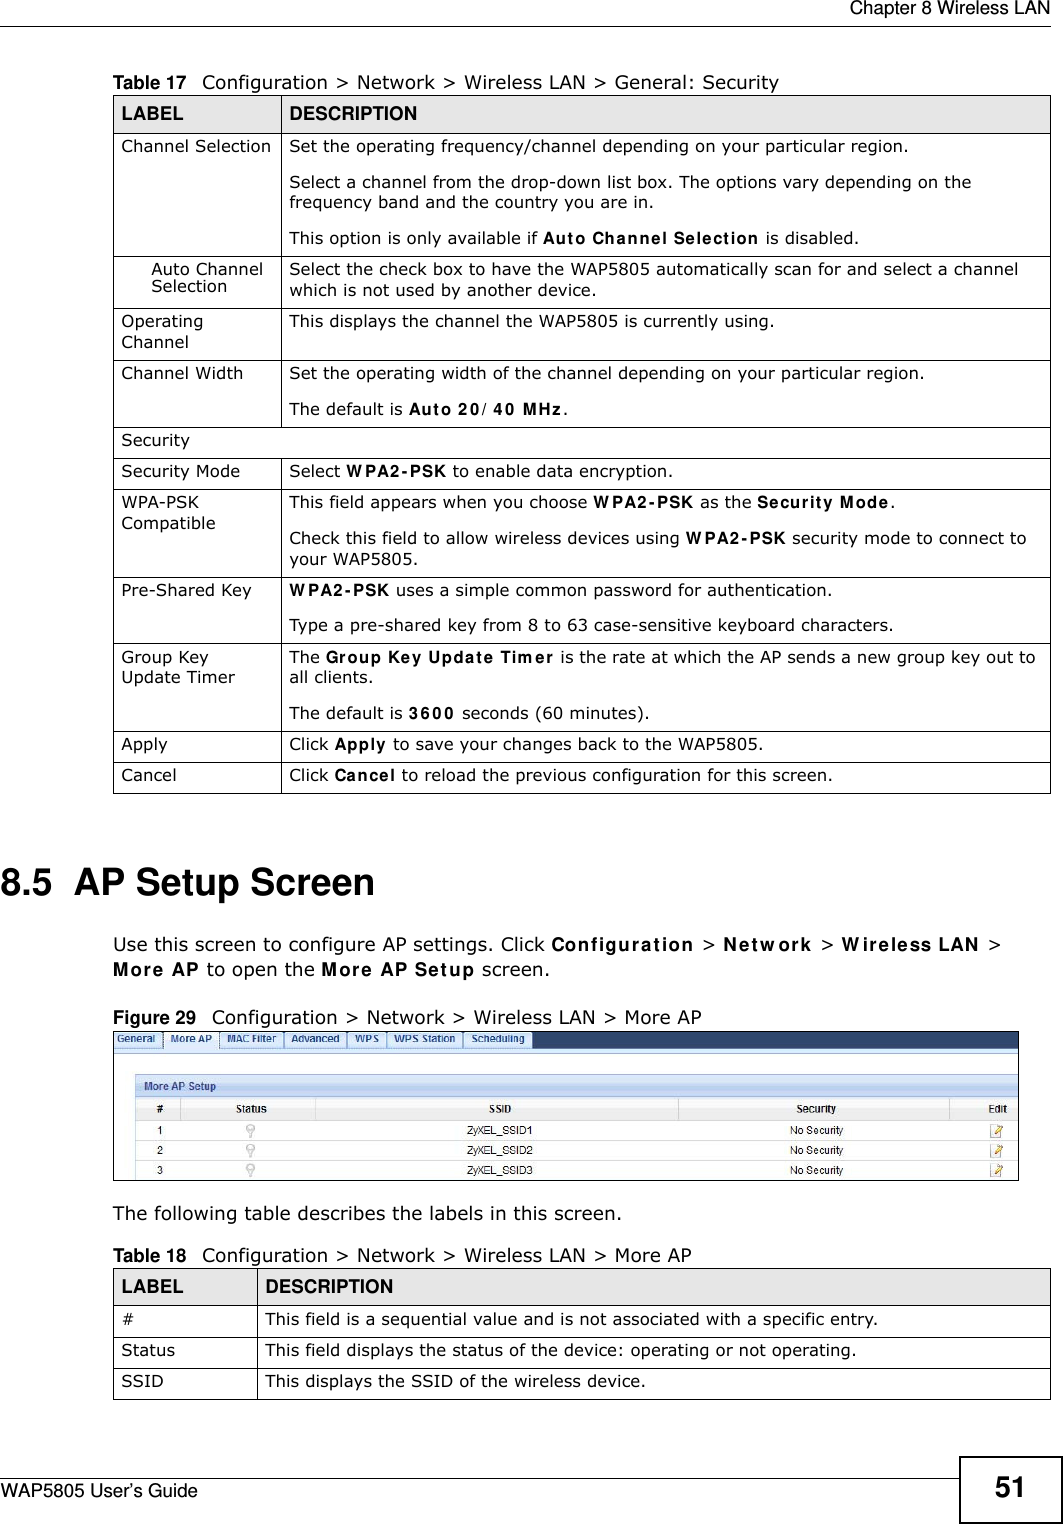  Chapter 8 Wireless LANWAP5805 User’s Guide 518.5  AP Setup Screen  Use this screen to configure AP settings. Click Configuration &gt; Network &gt; Wireless LAN &gt; More AP to open the More AP Setup screen.Figure 29   Configuration &gt; Network &gt; Wireless LAN &gt; More APThe following table describes the labels in this screen.Channel Selection Set the operating frequency/channel depending on your particular region. Select a channel from the drop-down list box. The options vary depending on the frequency band and the country you are in.This option is only available if Auto Channel Selection is disabled.Auto Channel Selection Select the check box to have the WAP5805 automatically scan for and select a channel which is not used by another device.Operating Channel This displays the channel the WAP5805 is currently using.Channel Width Set the operating width of the channel depending on your particular region. The default is Auto 20/40 MHz.SecuritySecurity Mode Select WPA2-PSK to enable data encryption.WPA-PSK CompatibleThis field appears when you choose WPA2-PSK as the Security Mode.Check this field to allow wireless devices using WPA2-PSK security mode to connect to your WAP5805.Pre-Shared Key  WPA2-PSK uses a simple common password for authentication.Type a pre-shared key from 8 to 63 case-sensitive keyboard characters.Group Key Update TimerThe Group Key Update Timer is the rate at which the AP sends a new group key out to all clients. The default is 3600 seconds (60 minutes).Apply Click Apply to save your changes back to the WAP5805.Cancel Click Cancel to reload the previous configuration for this screen.Table 17   Configuration &gt; Network &gt; Wireless LAN &gt; General: SecurityLABEL DESCRIPTIONTable 18   Configuration &gt; Network &gt; Wireless LAN &gt; More APLABEL DESCRIPTION#This field is a sequential value and is not associated with a specific entry.Status This field displays the status of the device: operating or not operating.SSID This displays the SSID of the wireless device.